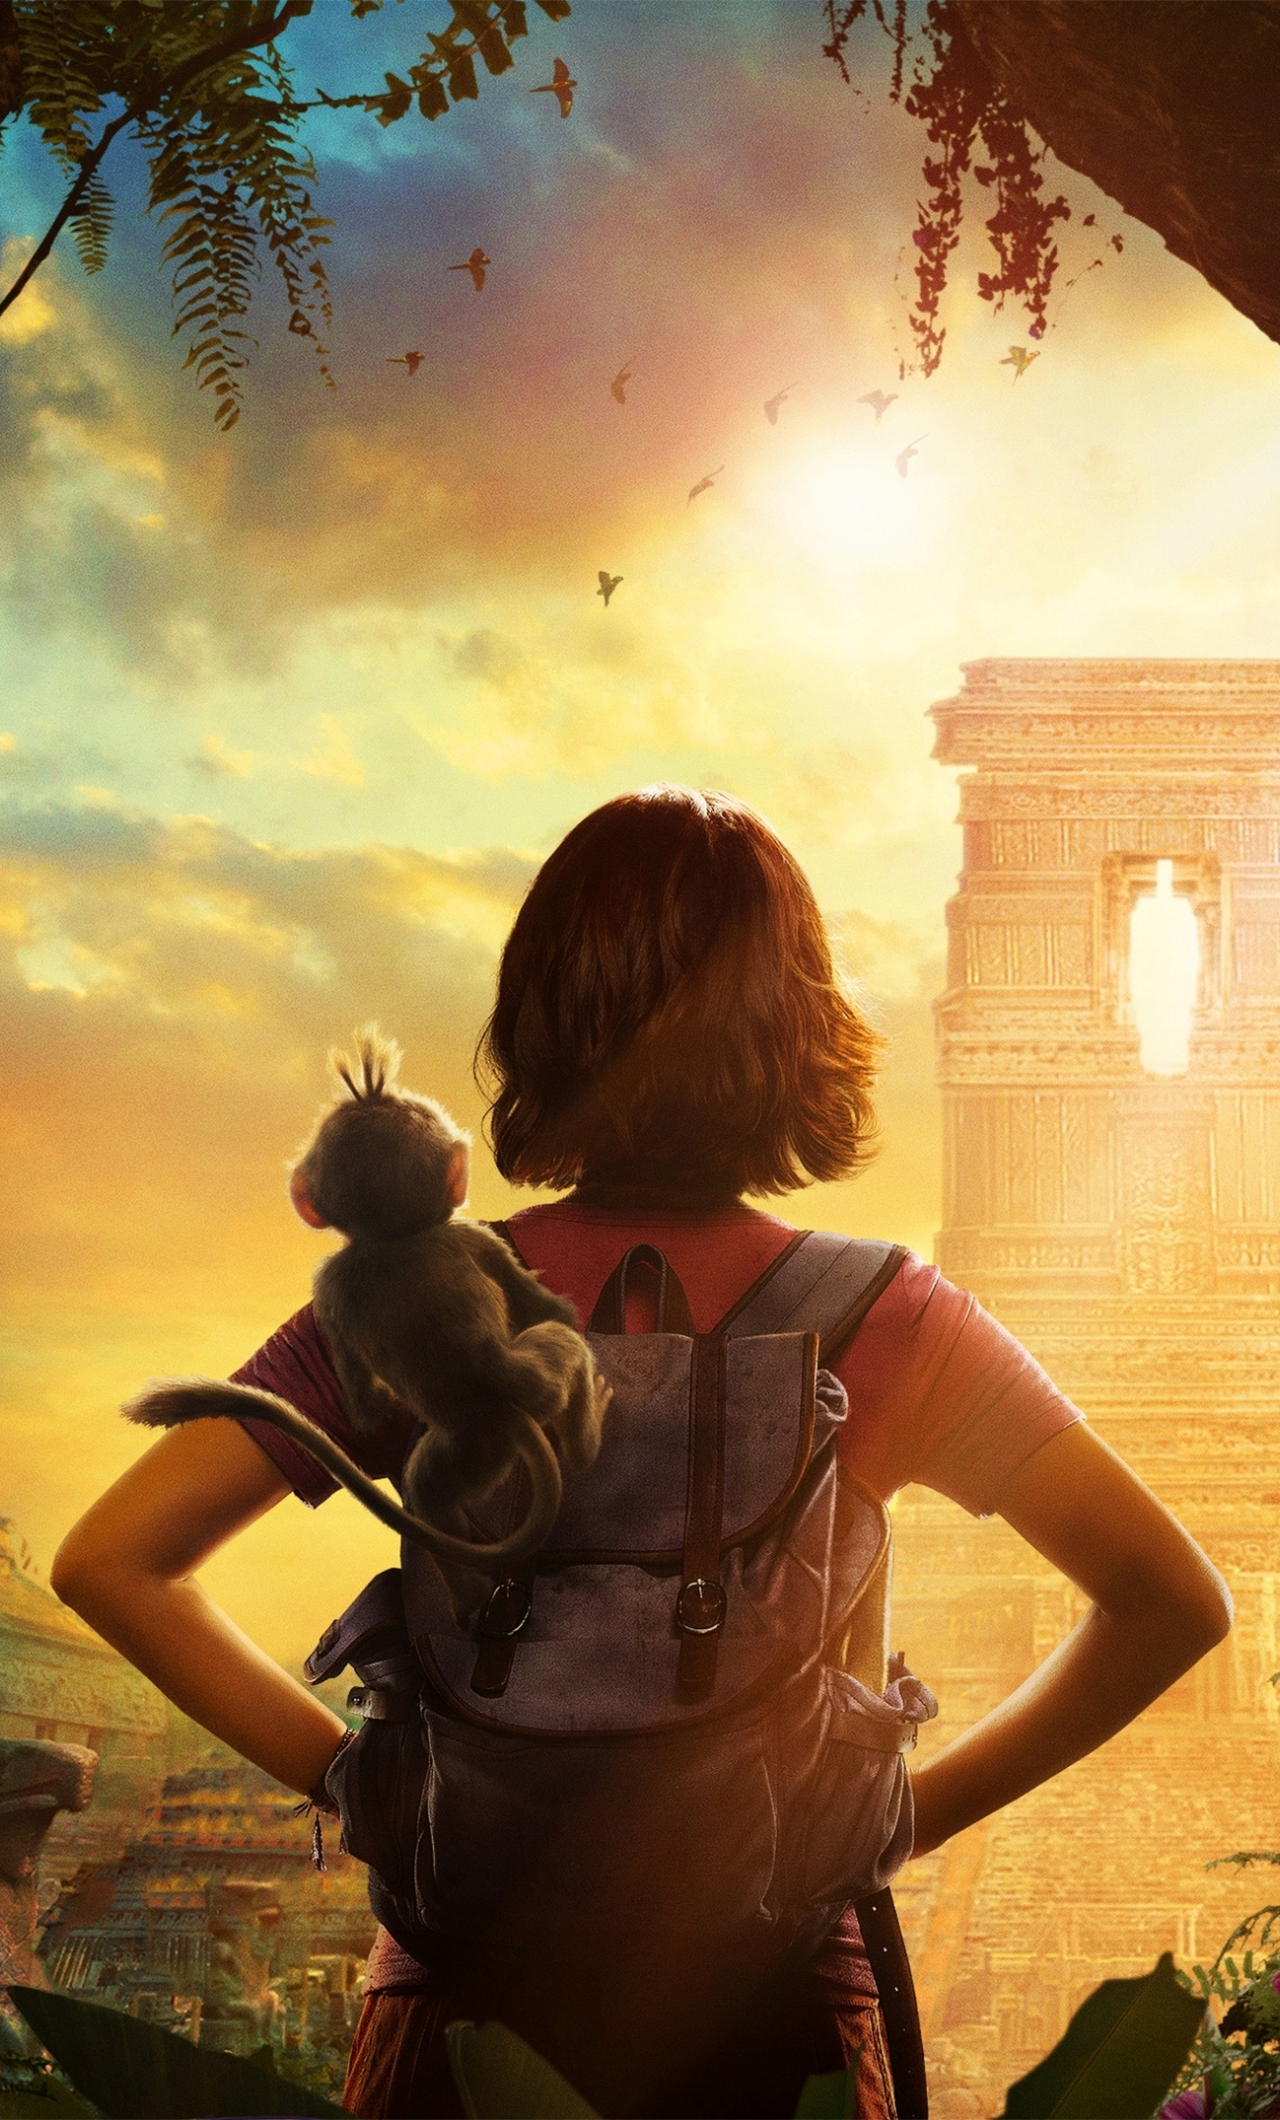 Download wallpaper 1280x2120 dora and the lost city of gold, dora and  monkey, 2019 movie, iphone 6 plus, 1280x2120 hd background, 22118